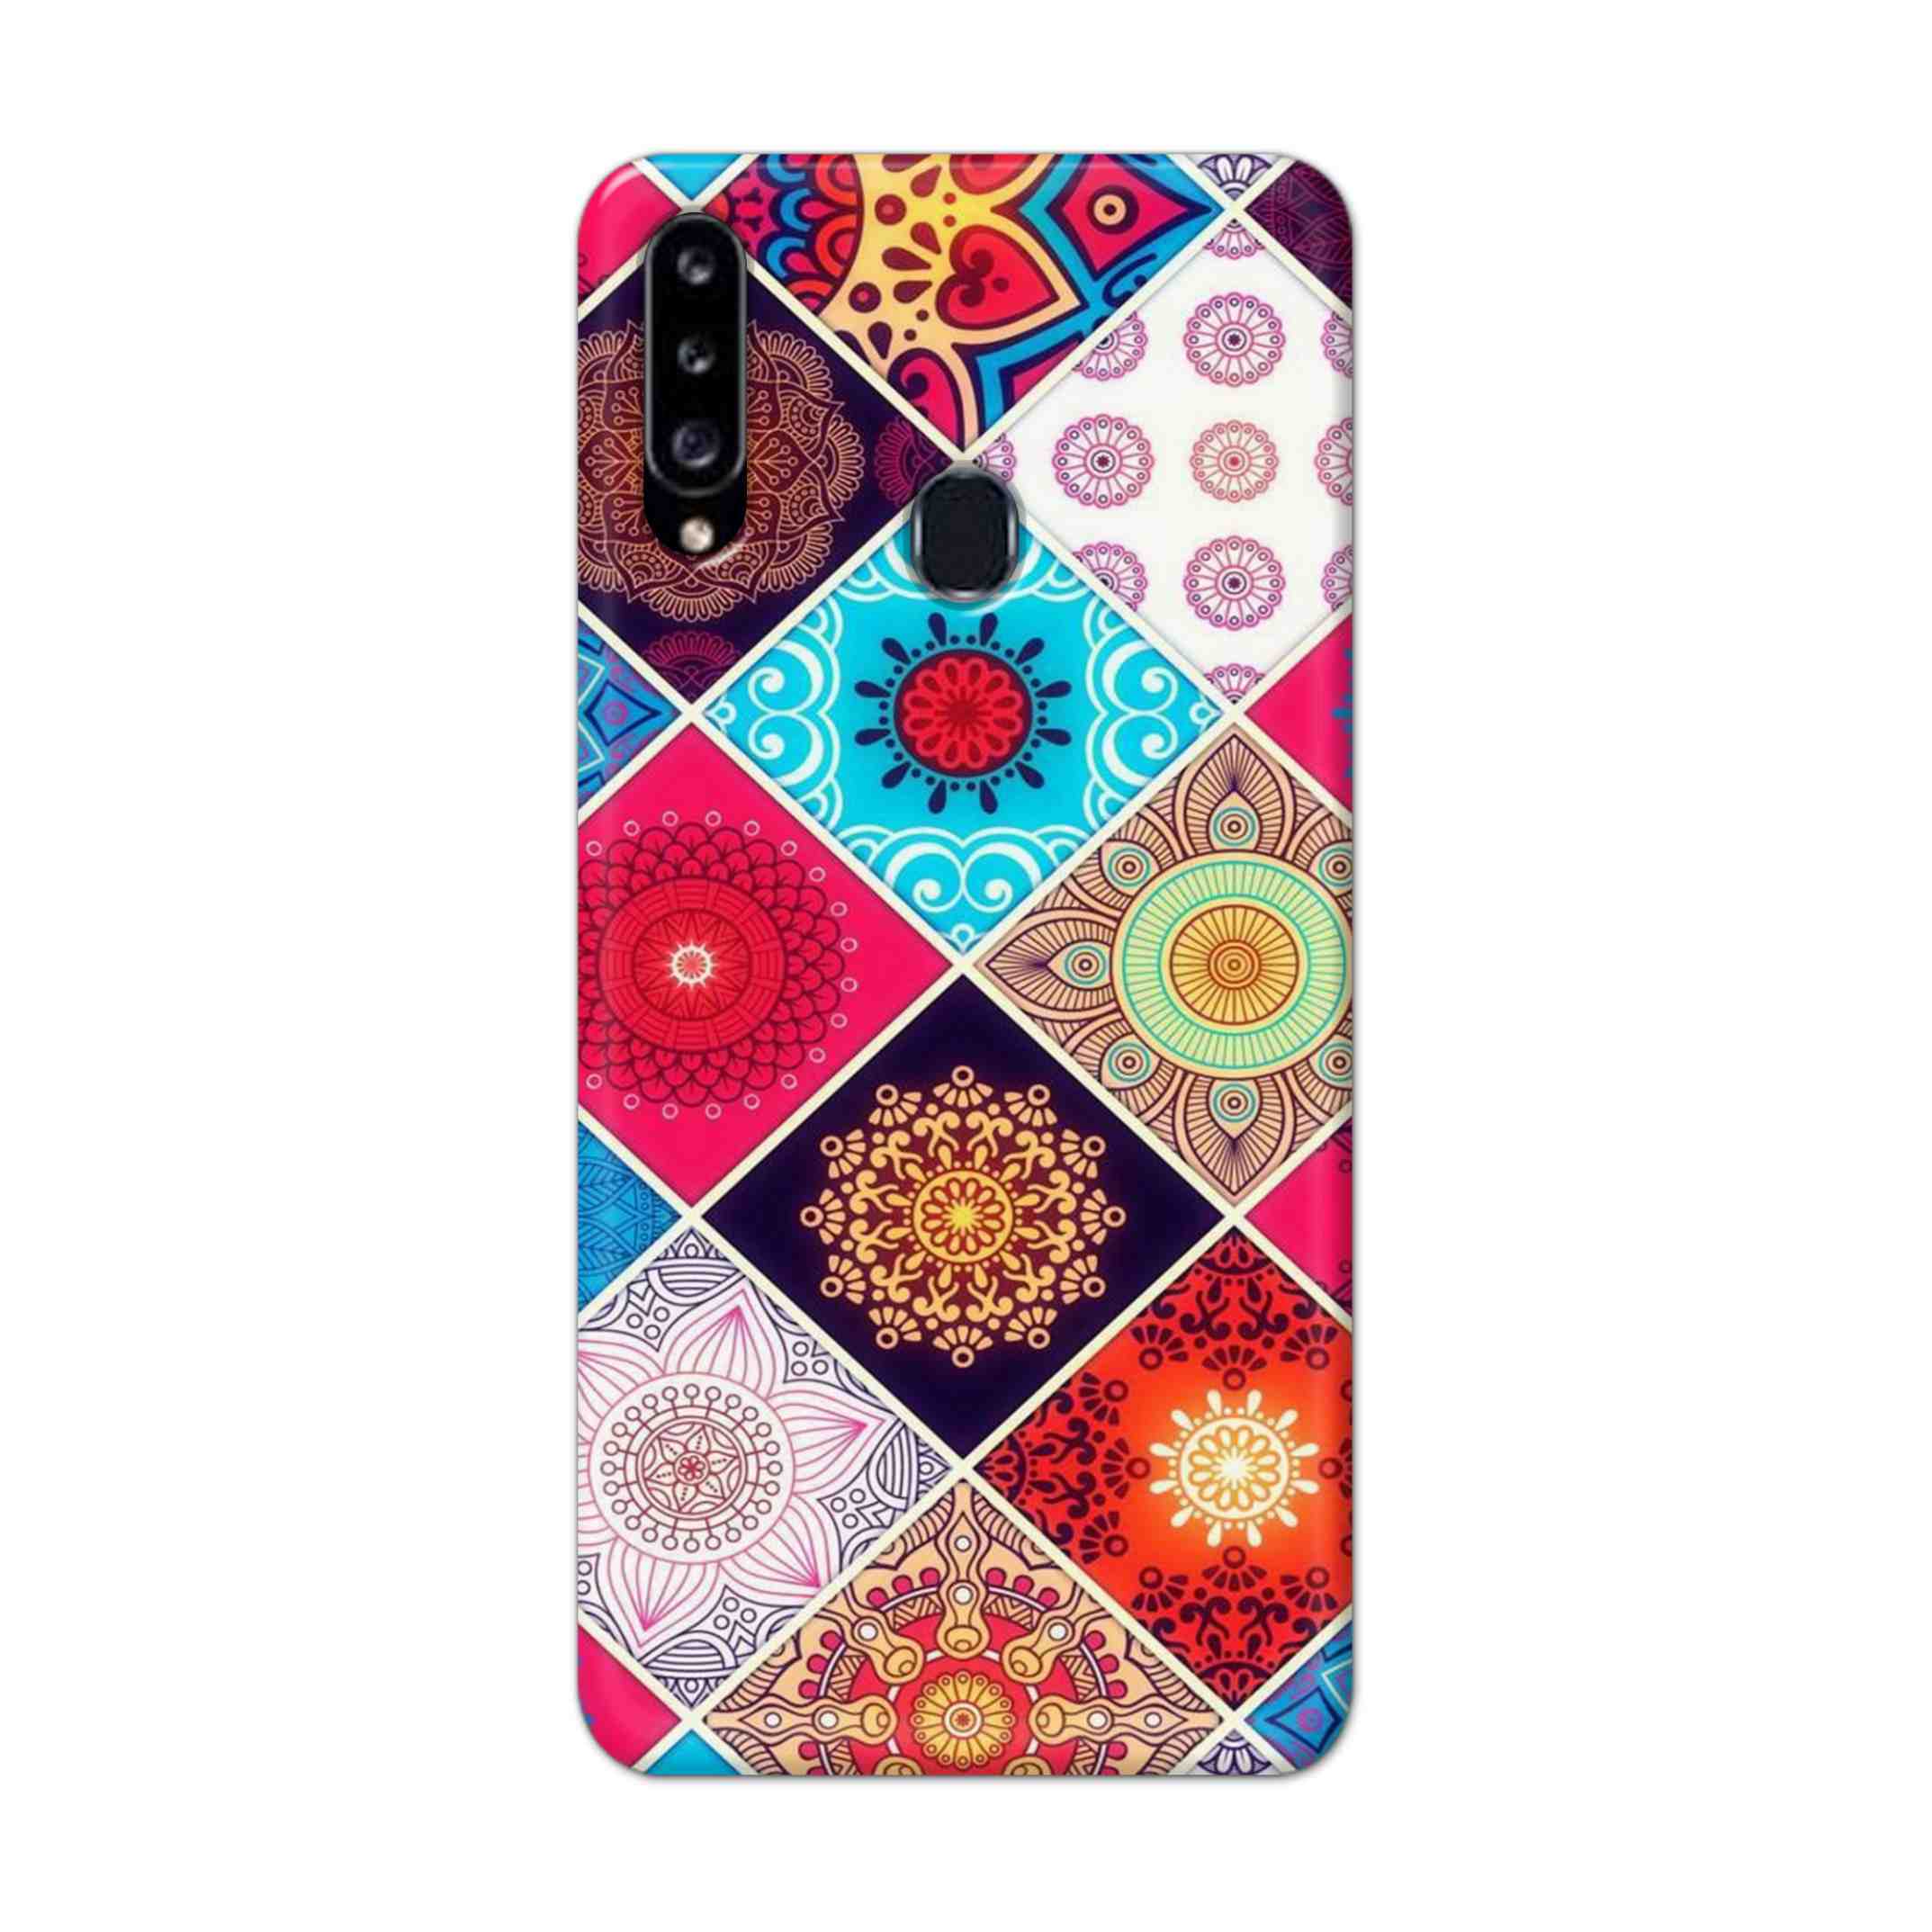 Buy Rainbow Mandala Hard Back Mobile Phone Case Cover For Samsung Galaxy A21 Online